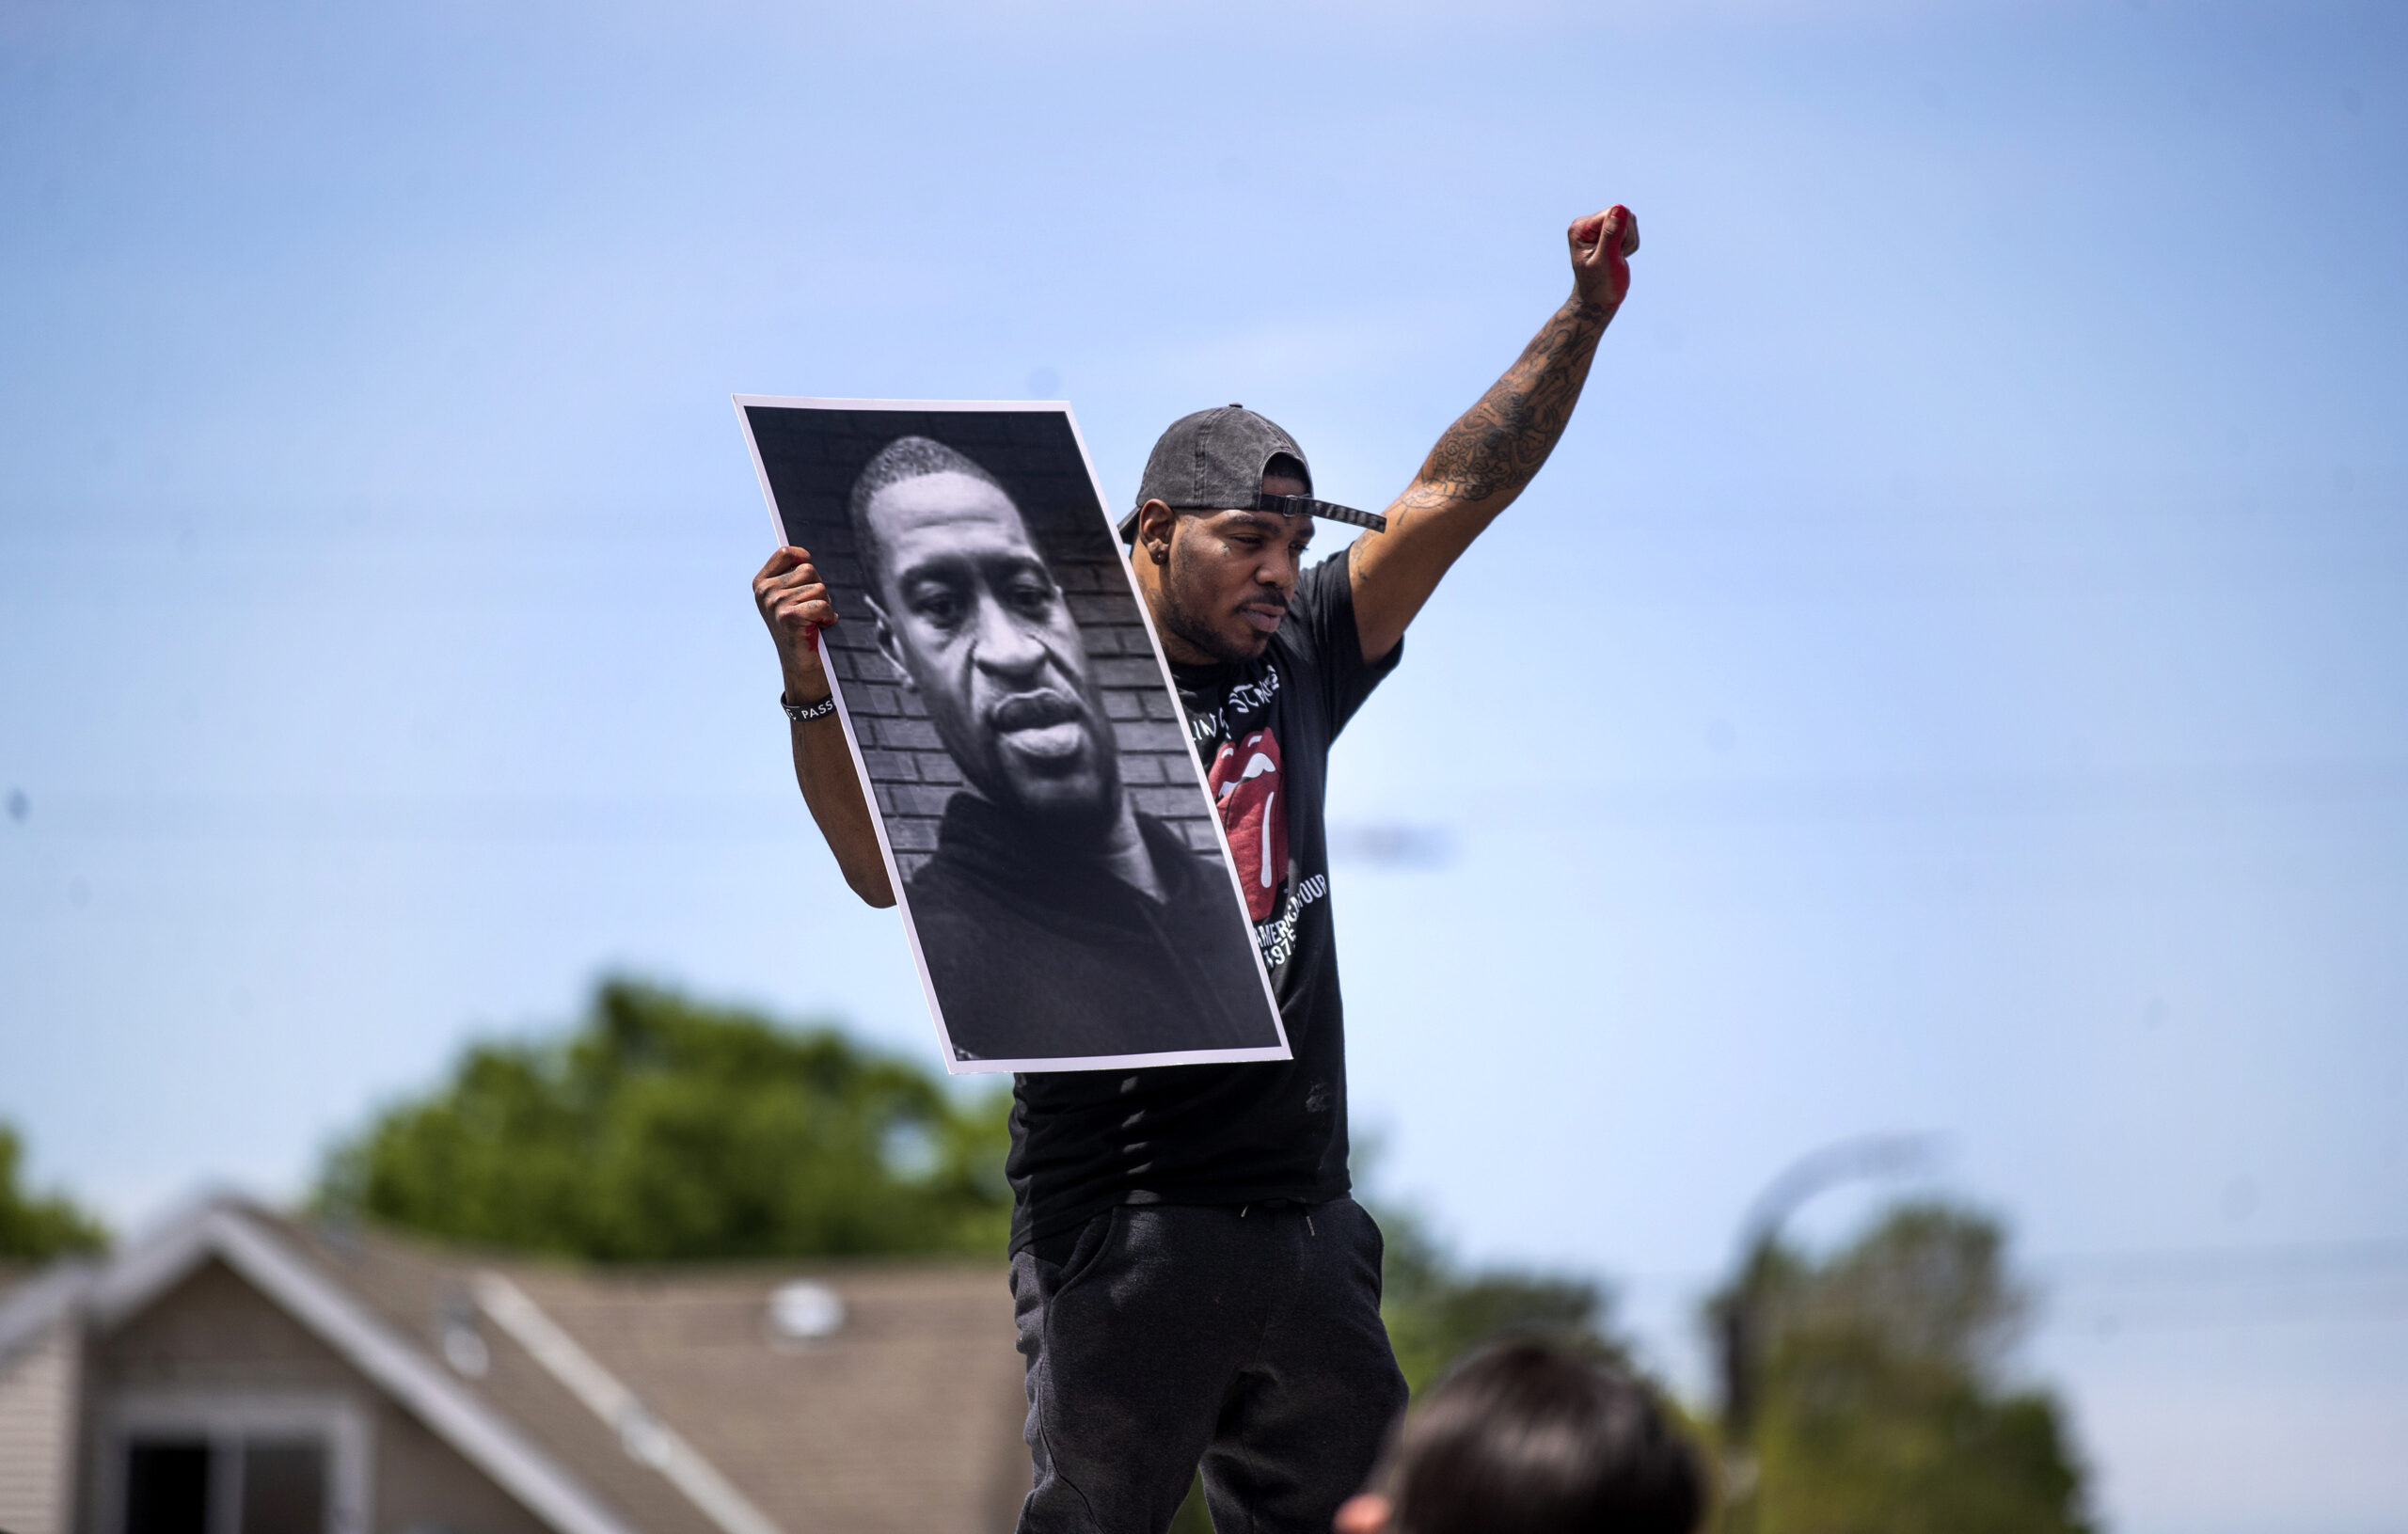 Tony L. Clark holds a photo of George Floyd outside the Cup Food convenience store, near where Floyd was killed, May 28, 2020, in Minneapolis. (Image: Jerry Holt/Star Tribune via AP)